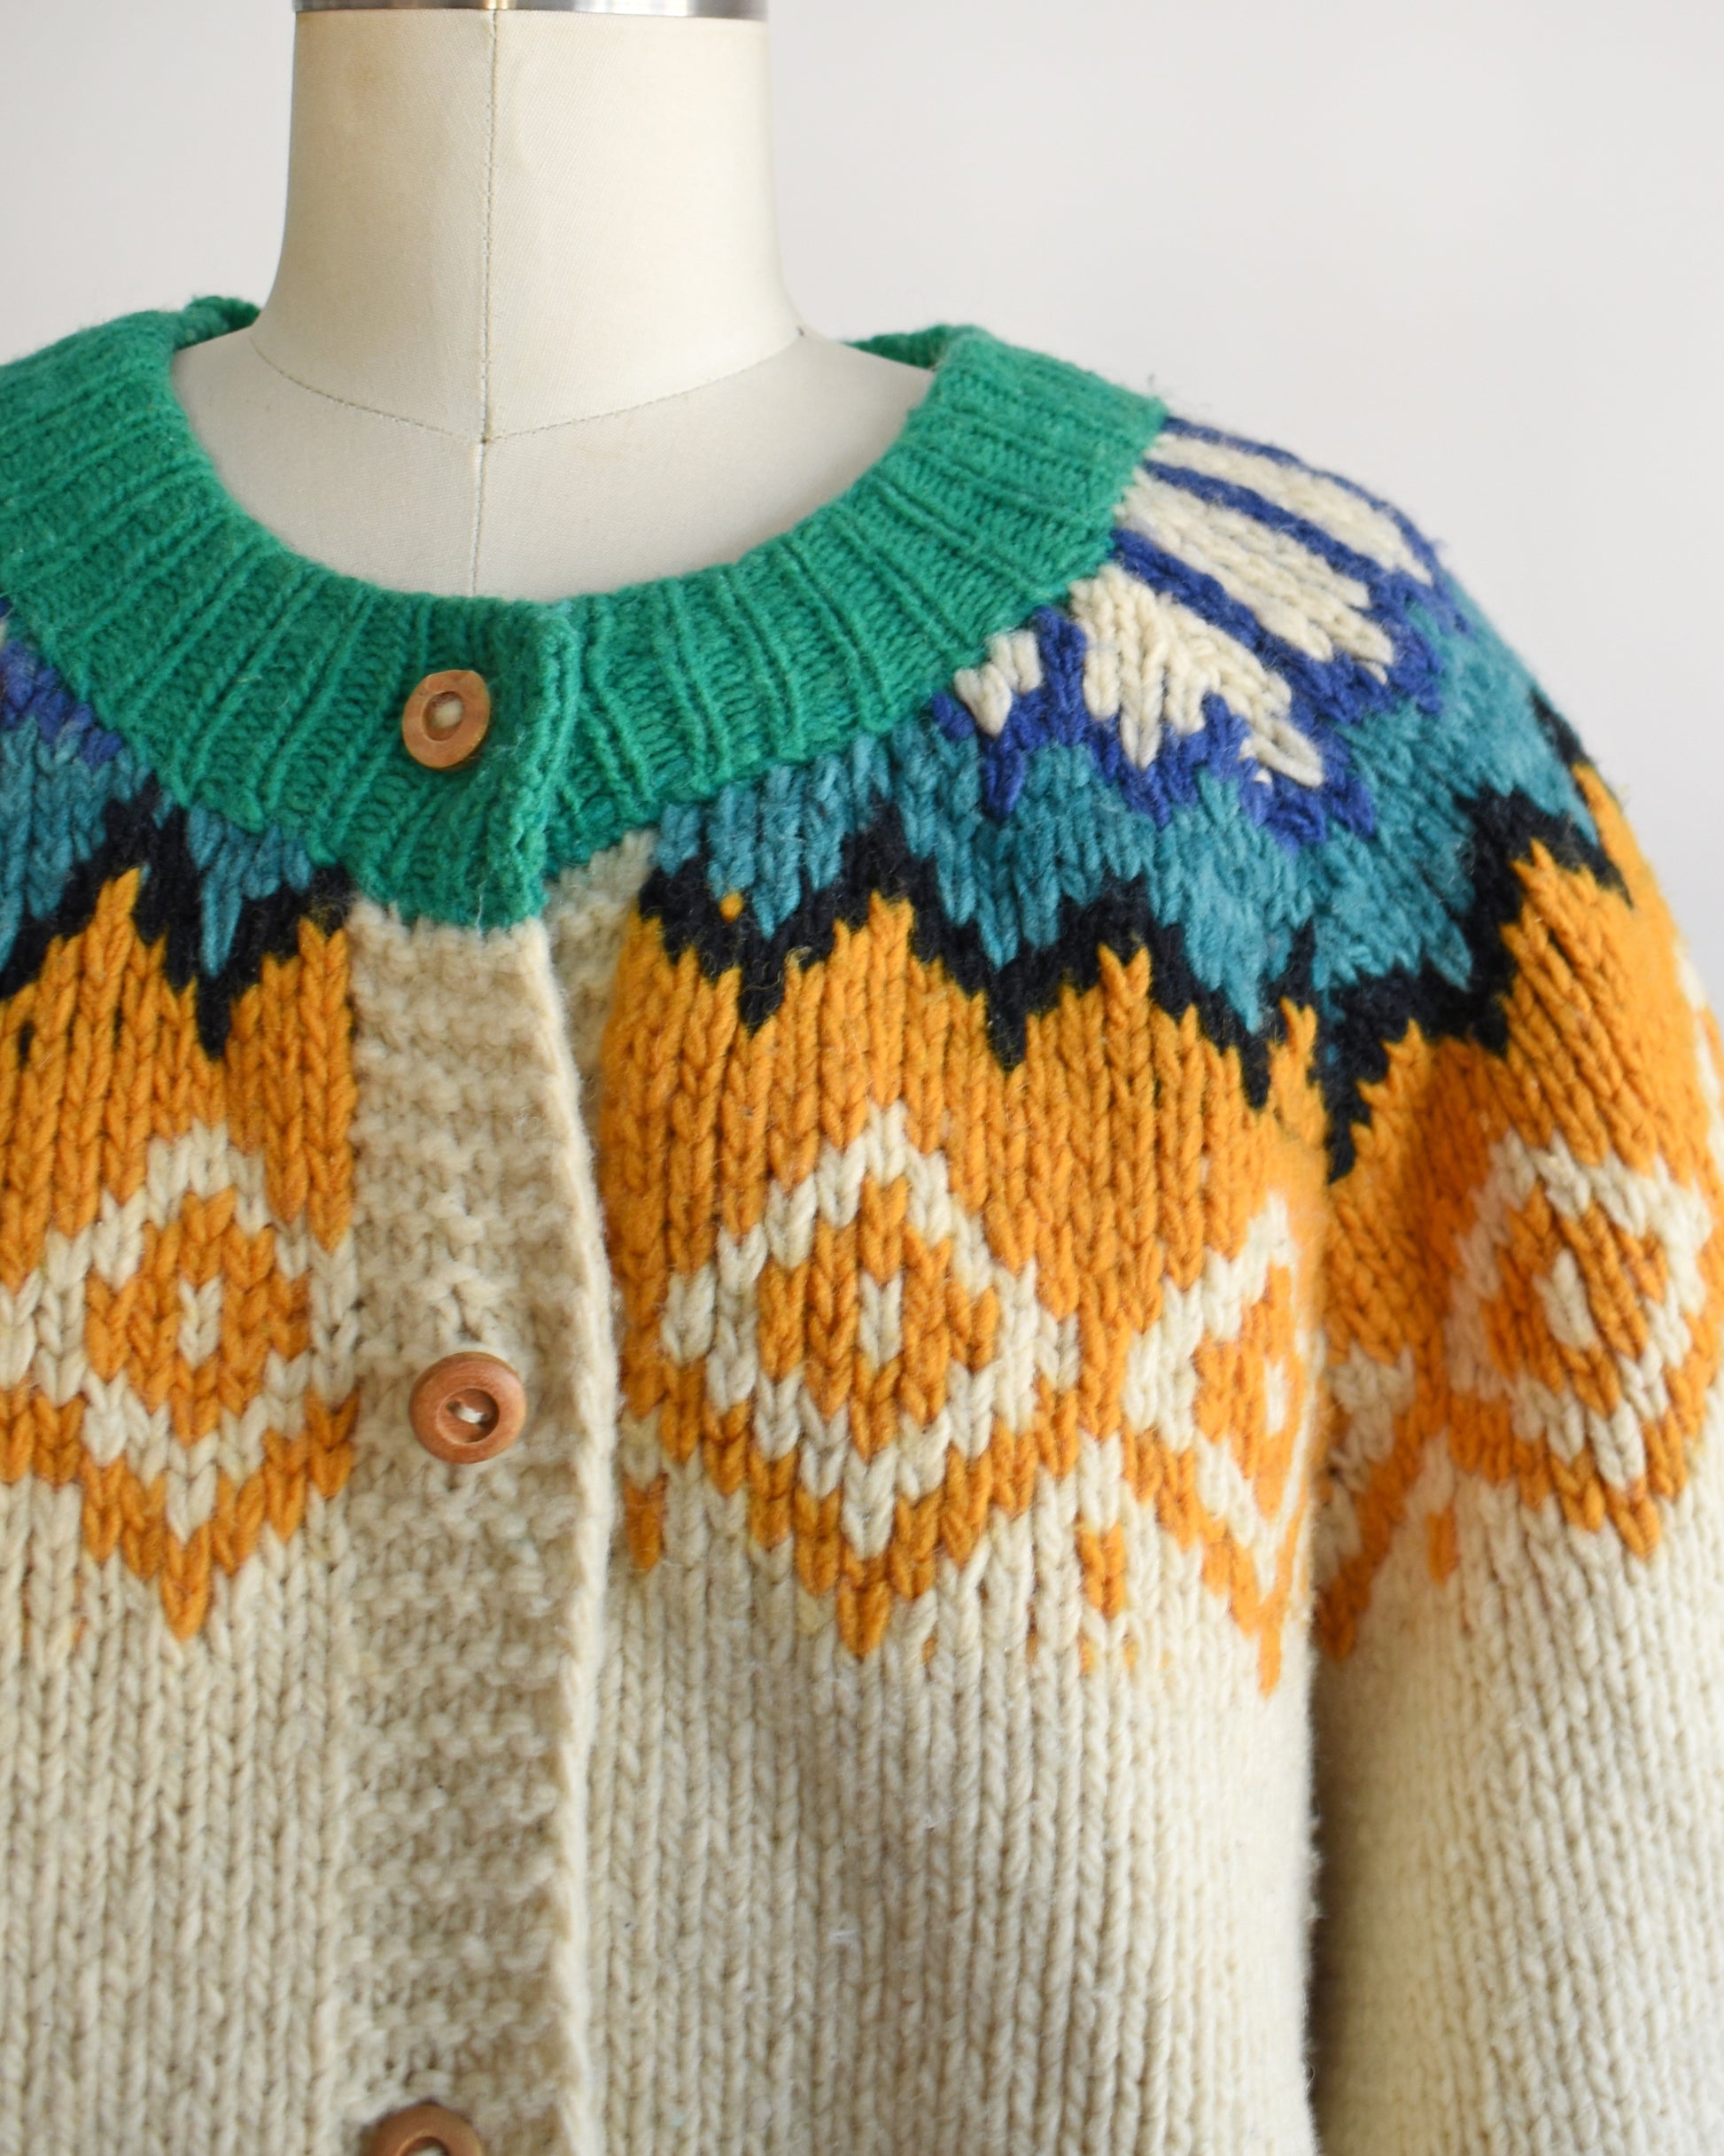 Close up of a vintage 1970s cream wool cardigan with bright green, dark blue, light blue, black, cream, and light orange Fair Isle pattern around the collar, and wood buttons on the front.